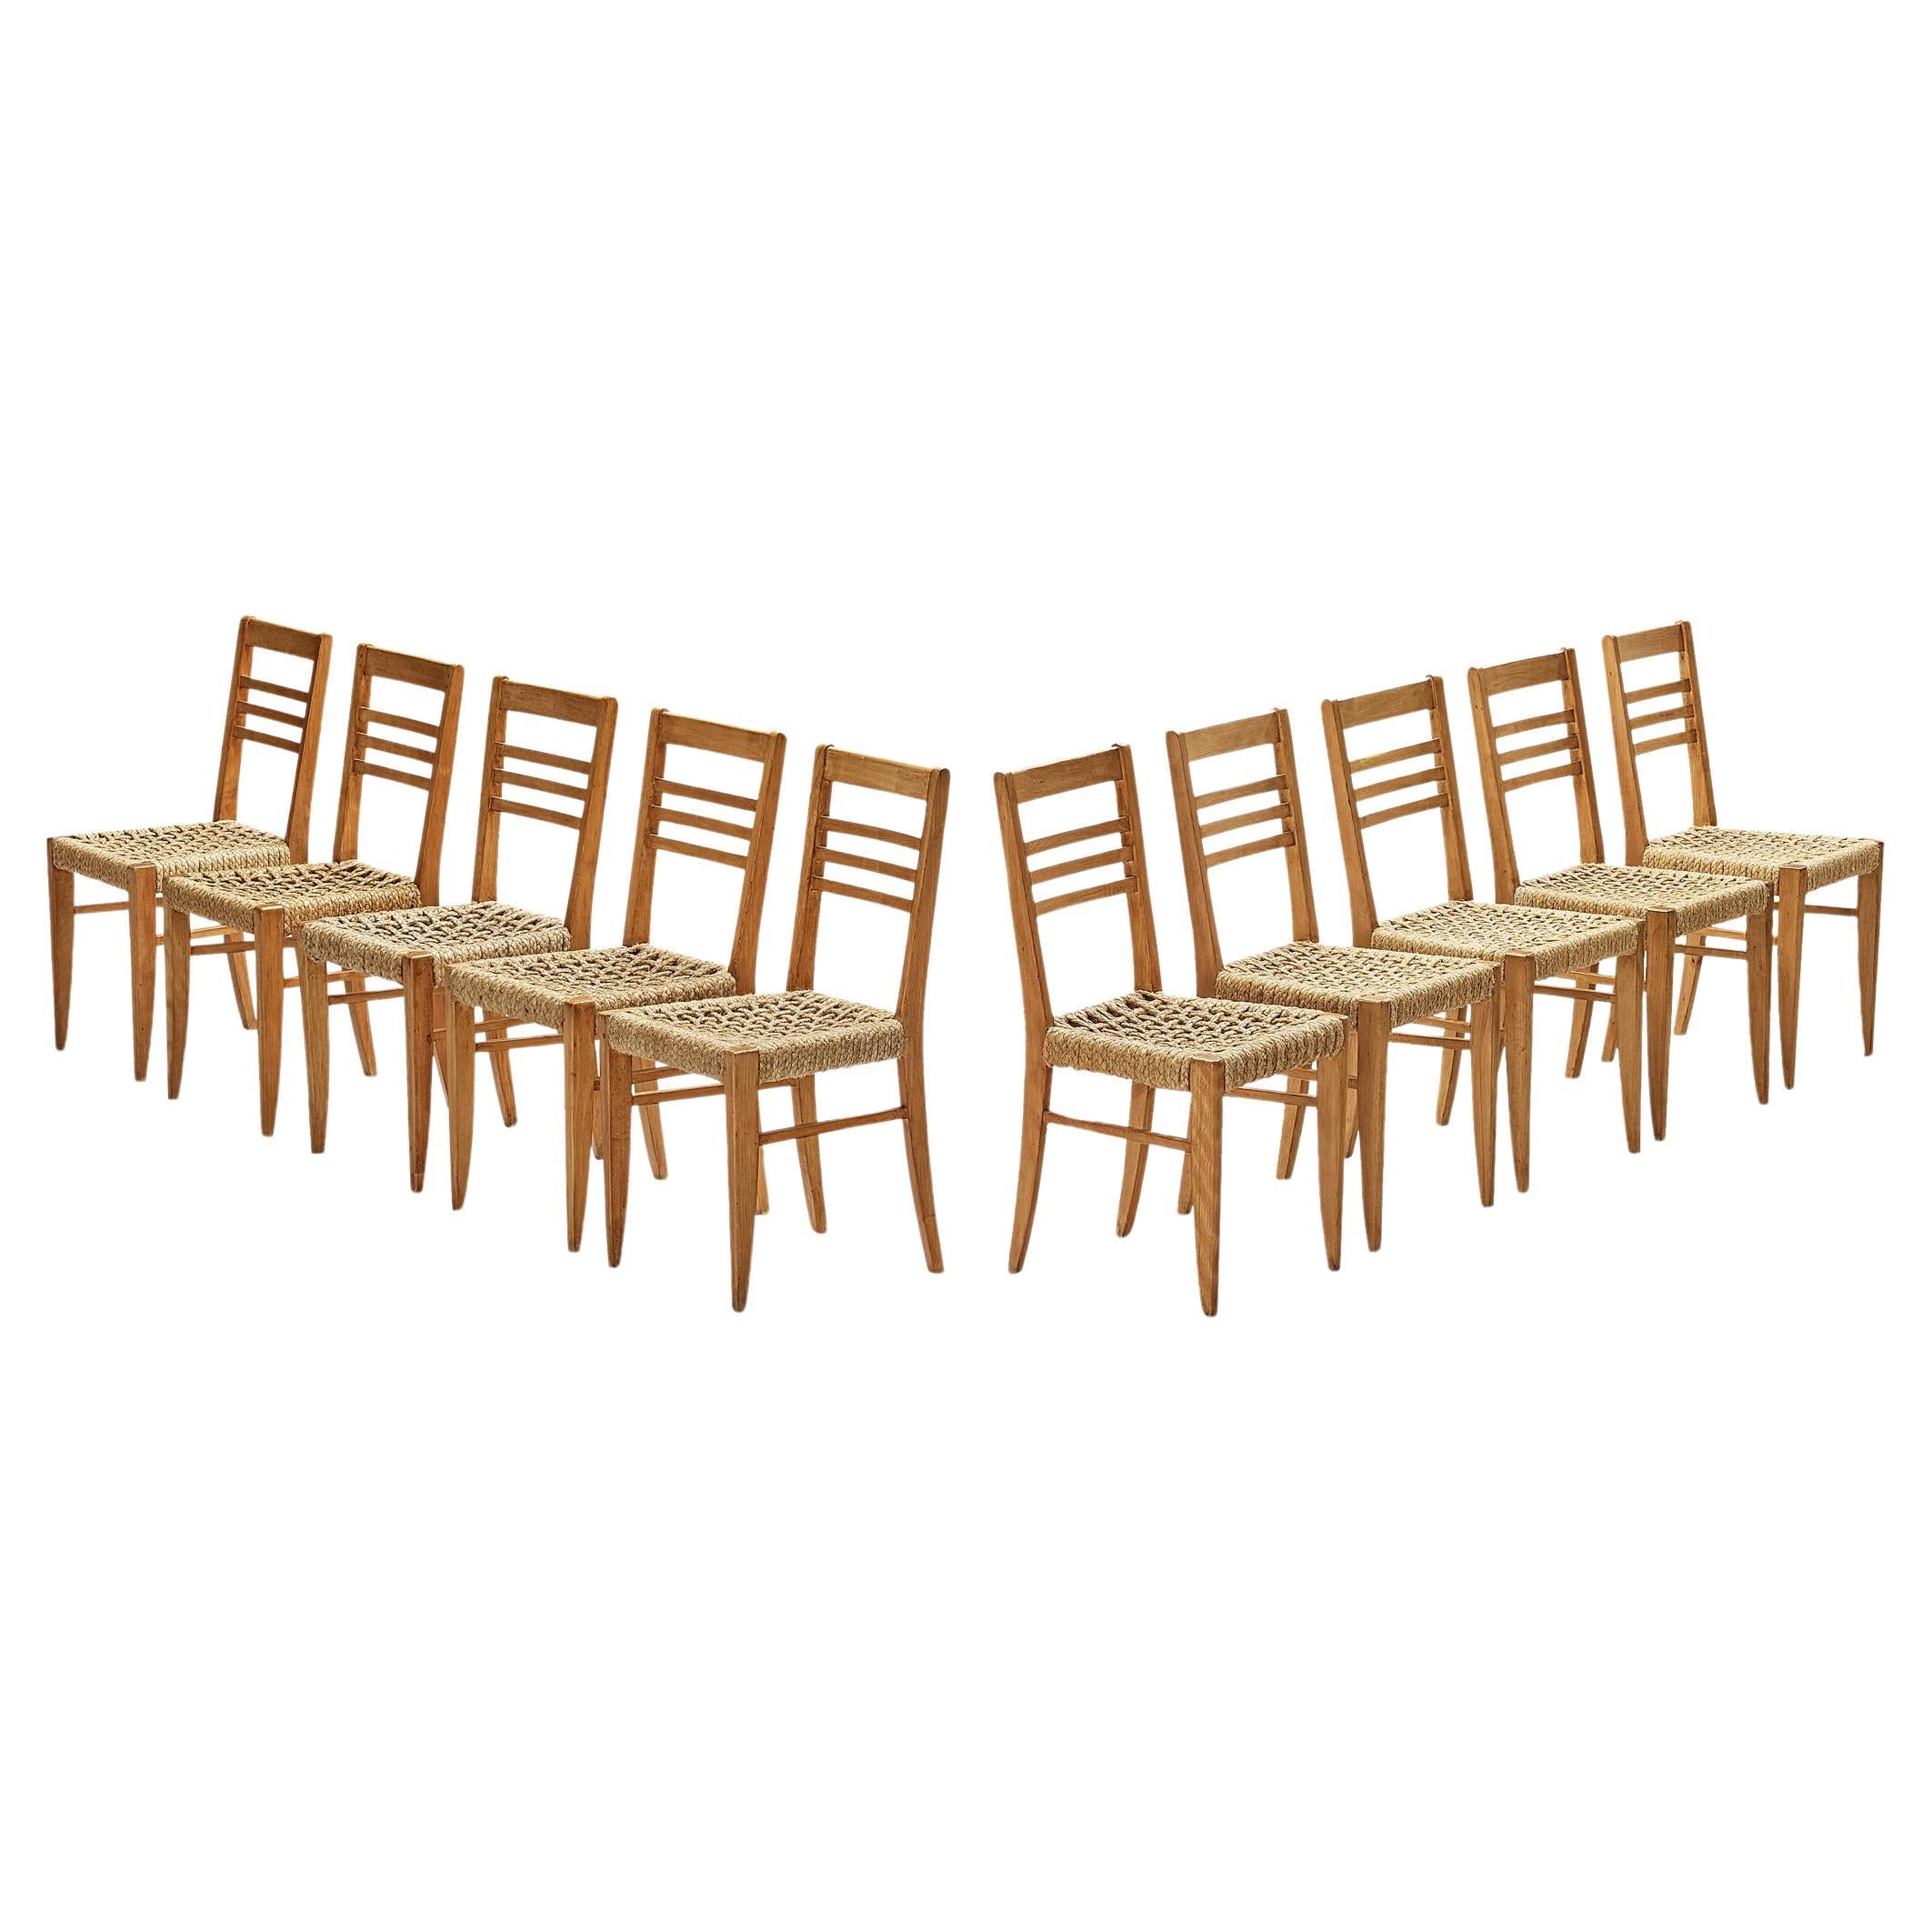 Adrien Audoux & Frida Minet Set of Ten Dining Chairs in Braided Hemp  For Sale